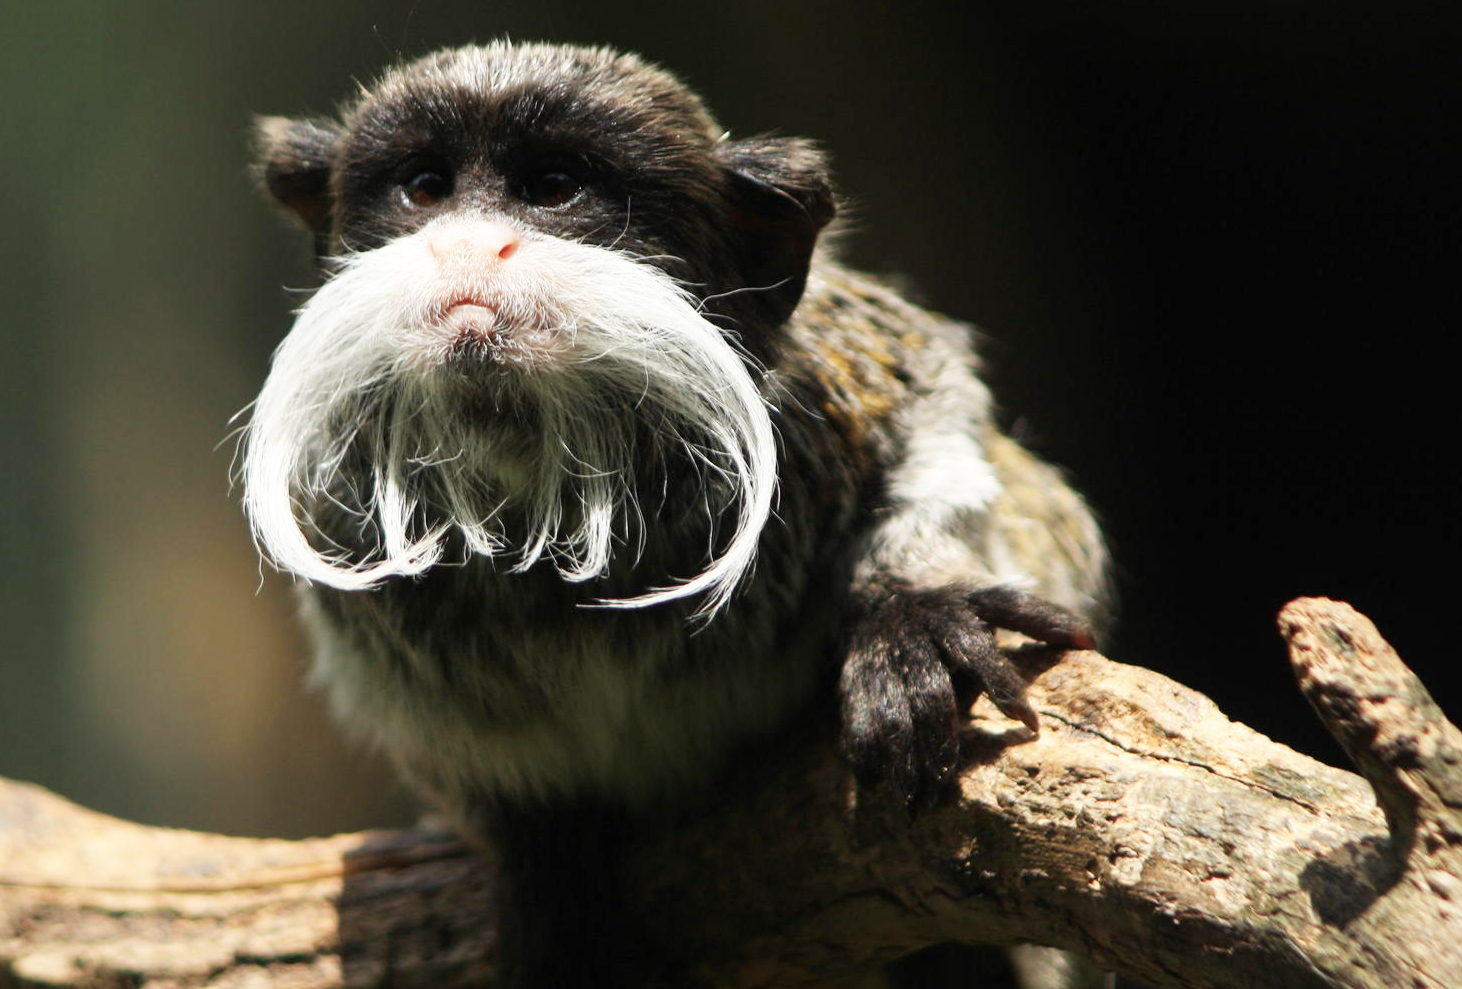 The Emperor Tamarin is allegedly named for its resemblance to the German 
Emperor Wilhelm II.